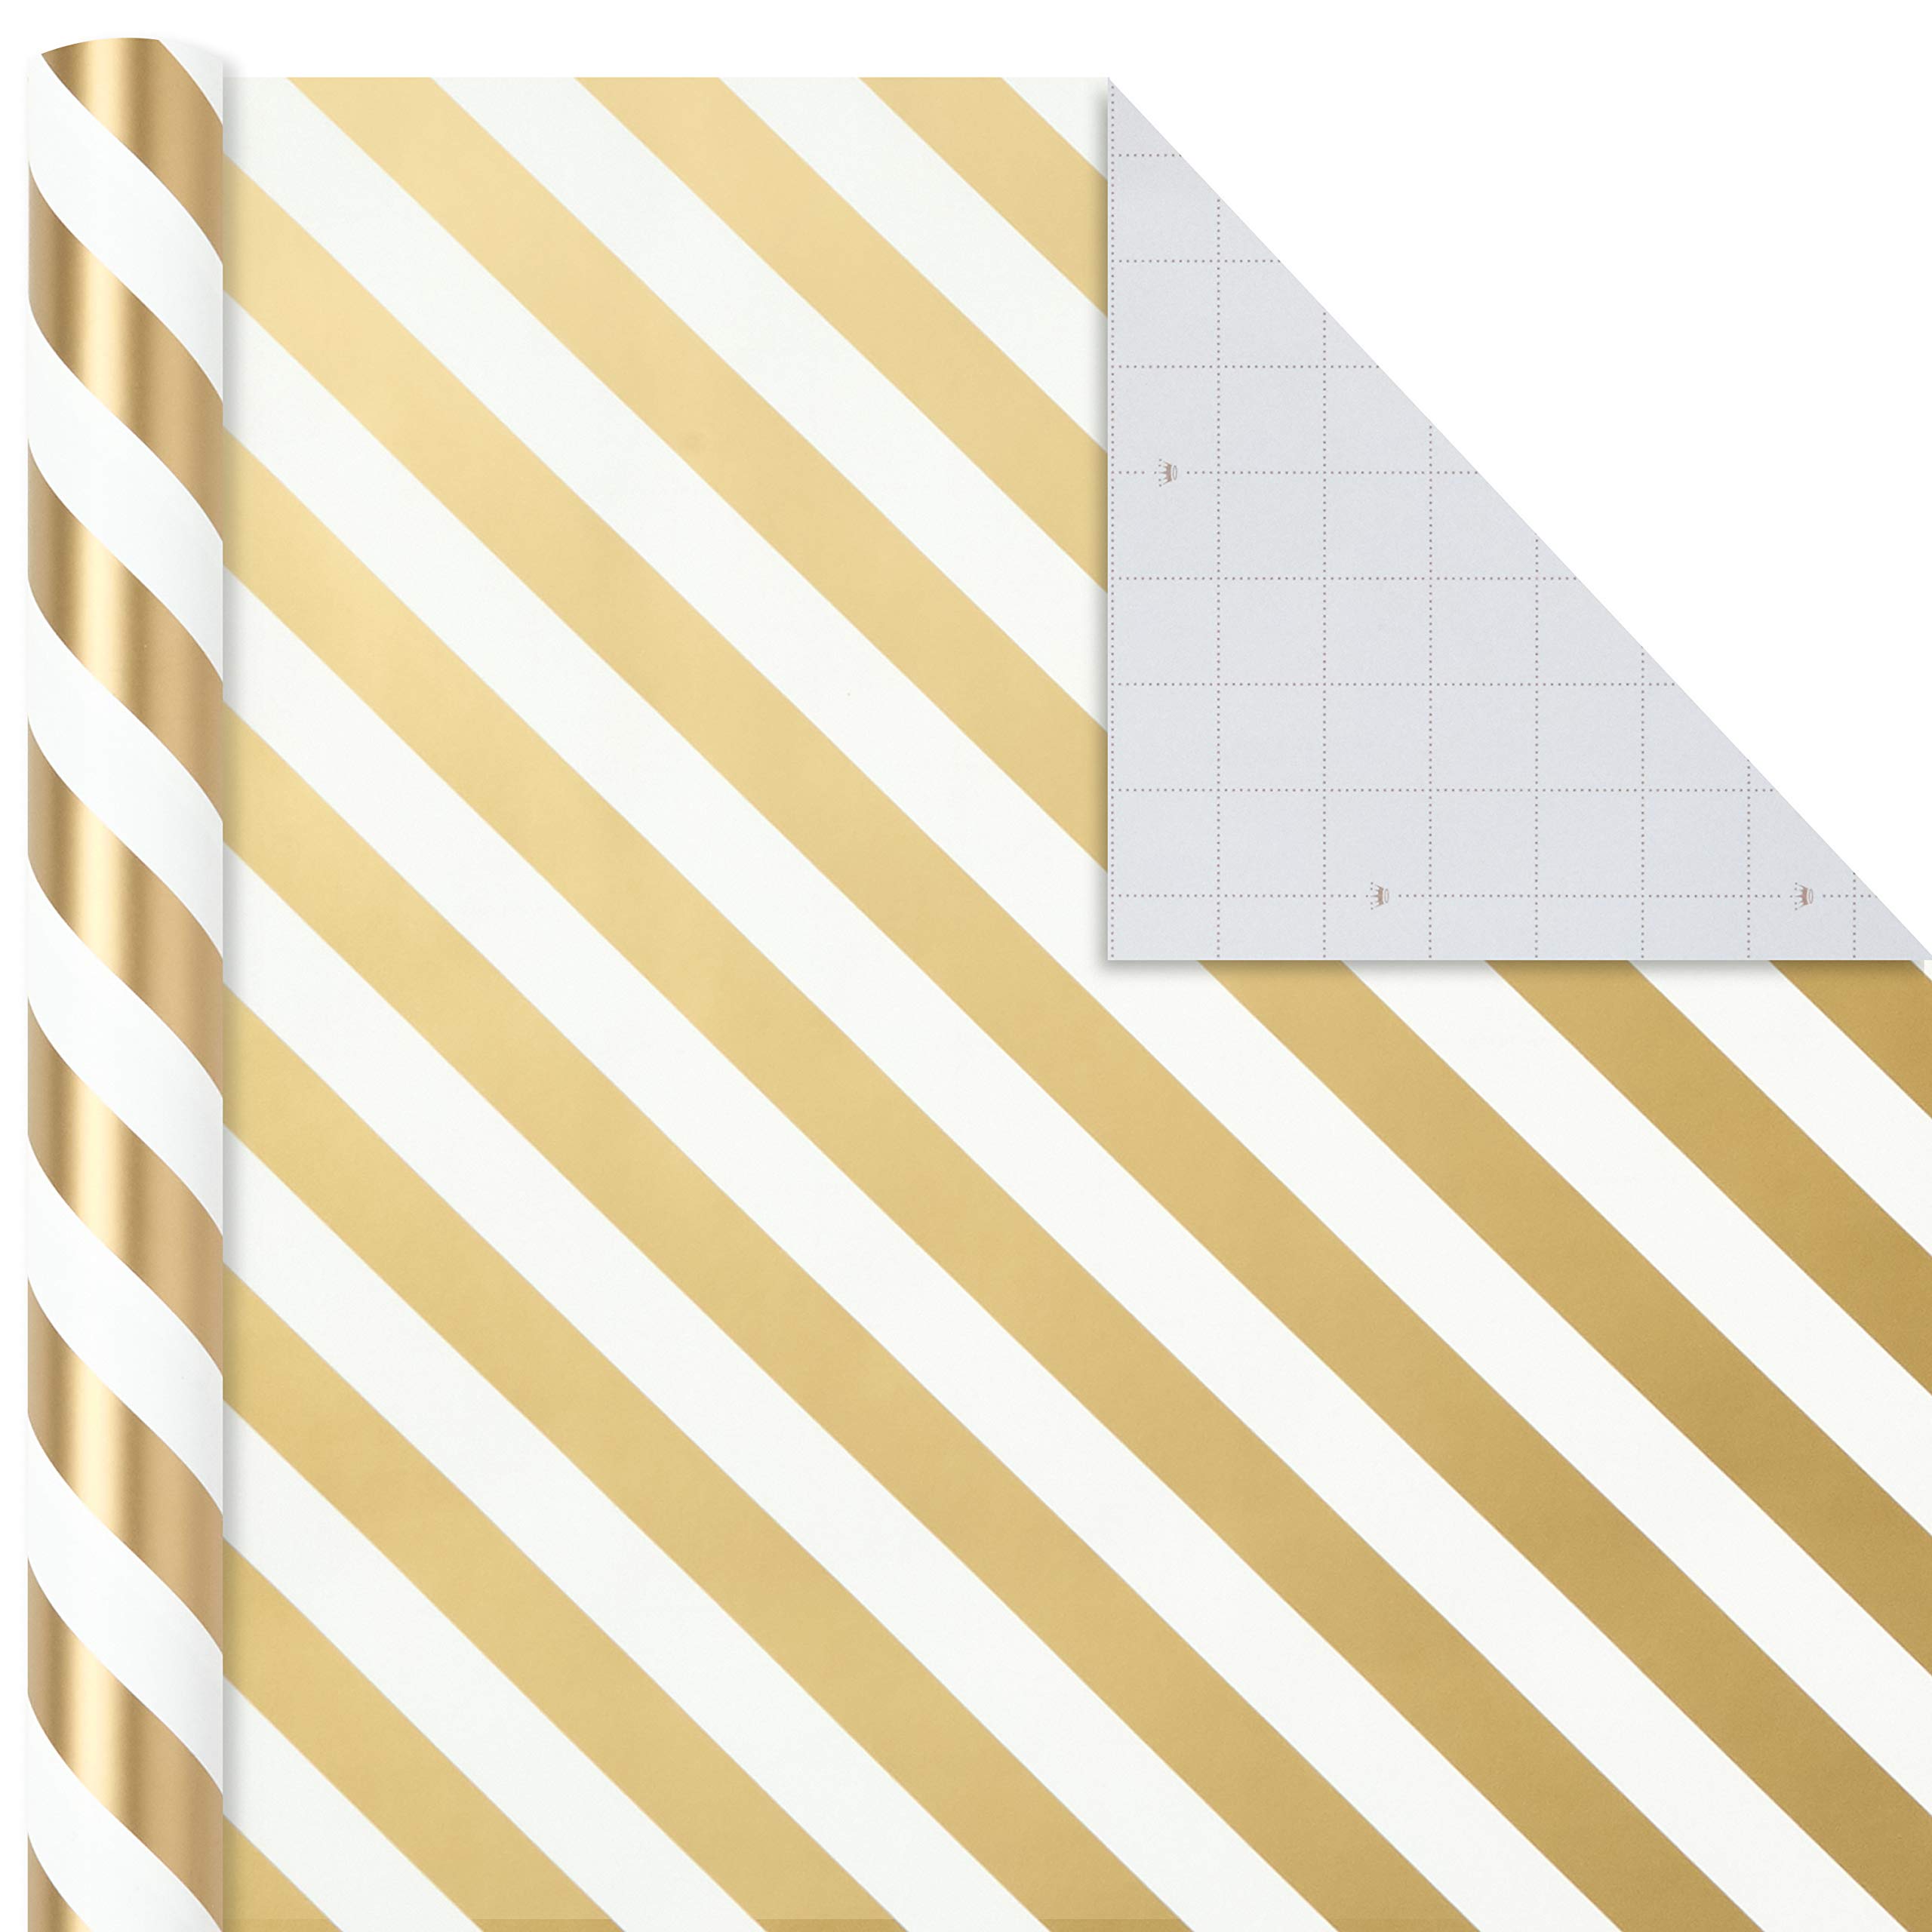 Hallmark Gold and White Wrapping Paper with Cutlines on Reverse (3 Rolls: 105 sq. ft. ttl) for Birthdays, Weddings, Christmas, Hanukkah, Graduations, Engagements, Bridal Showers